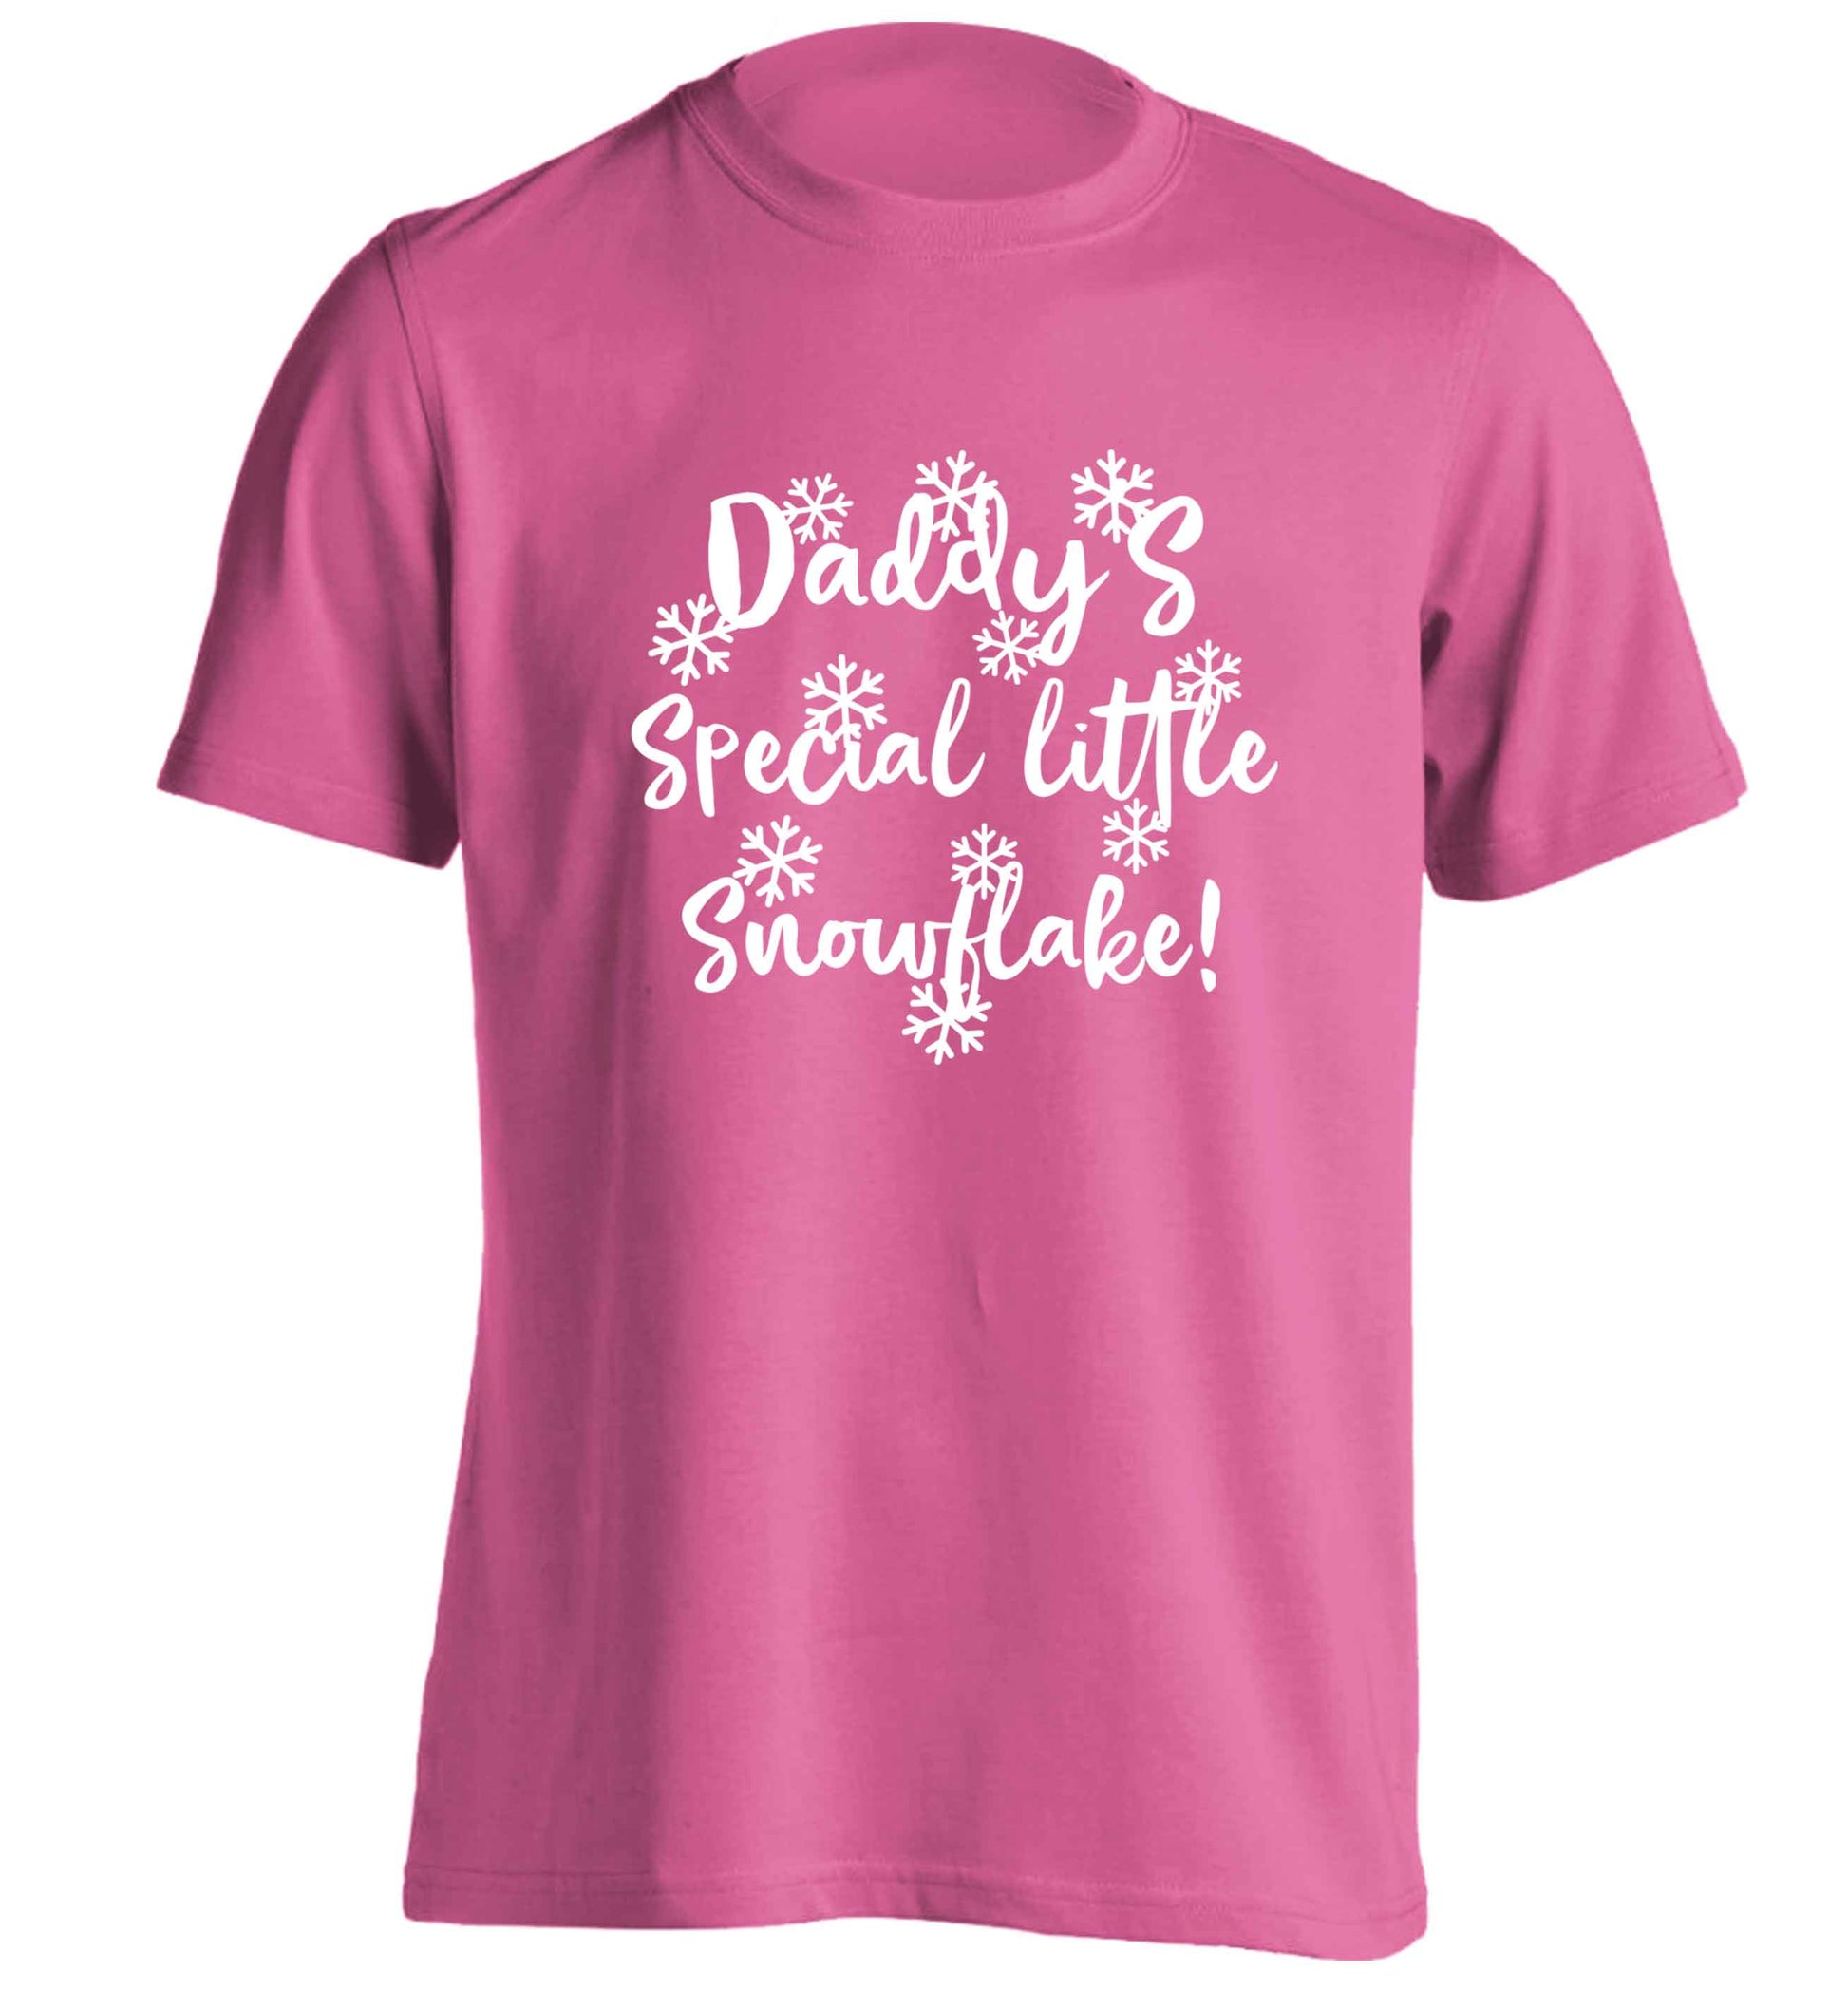 Daddy's special little snowflake adults unisex pink Tshirt 2XL